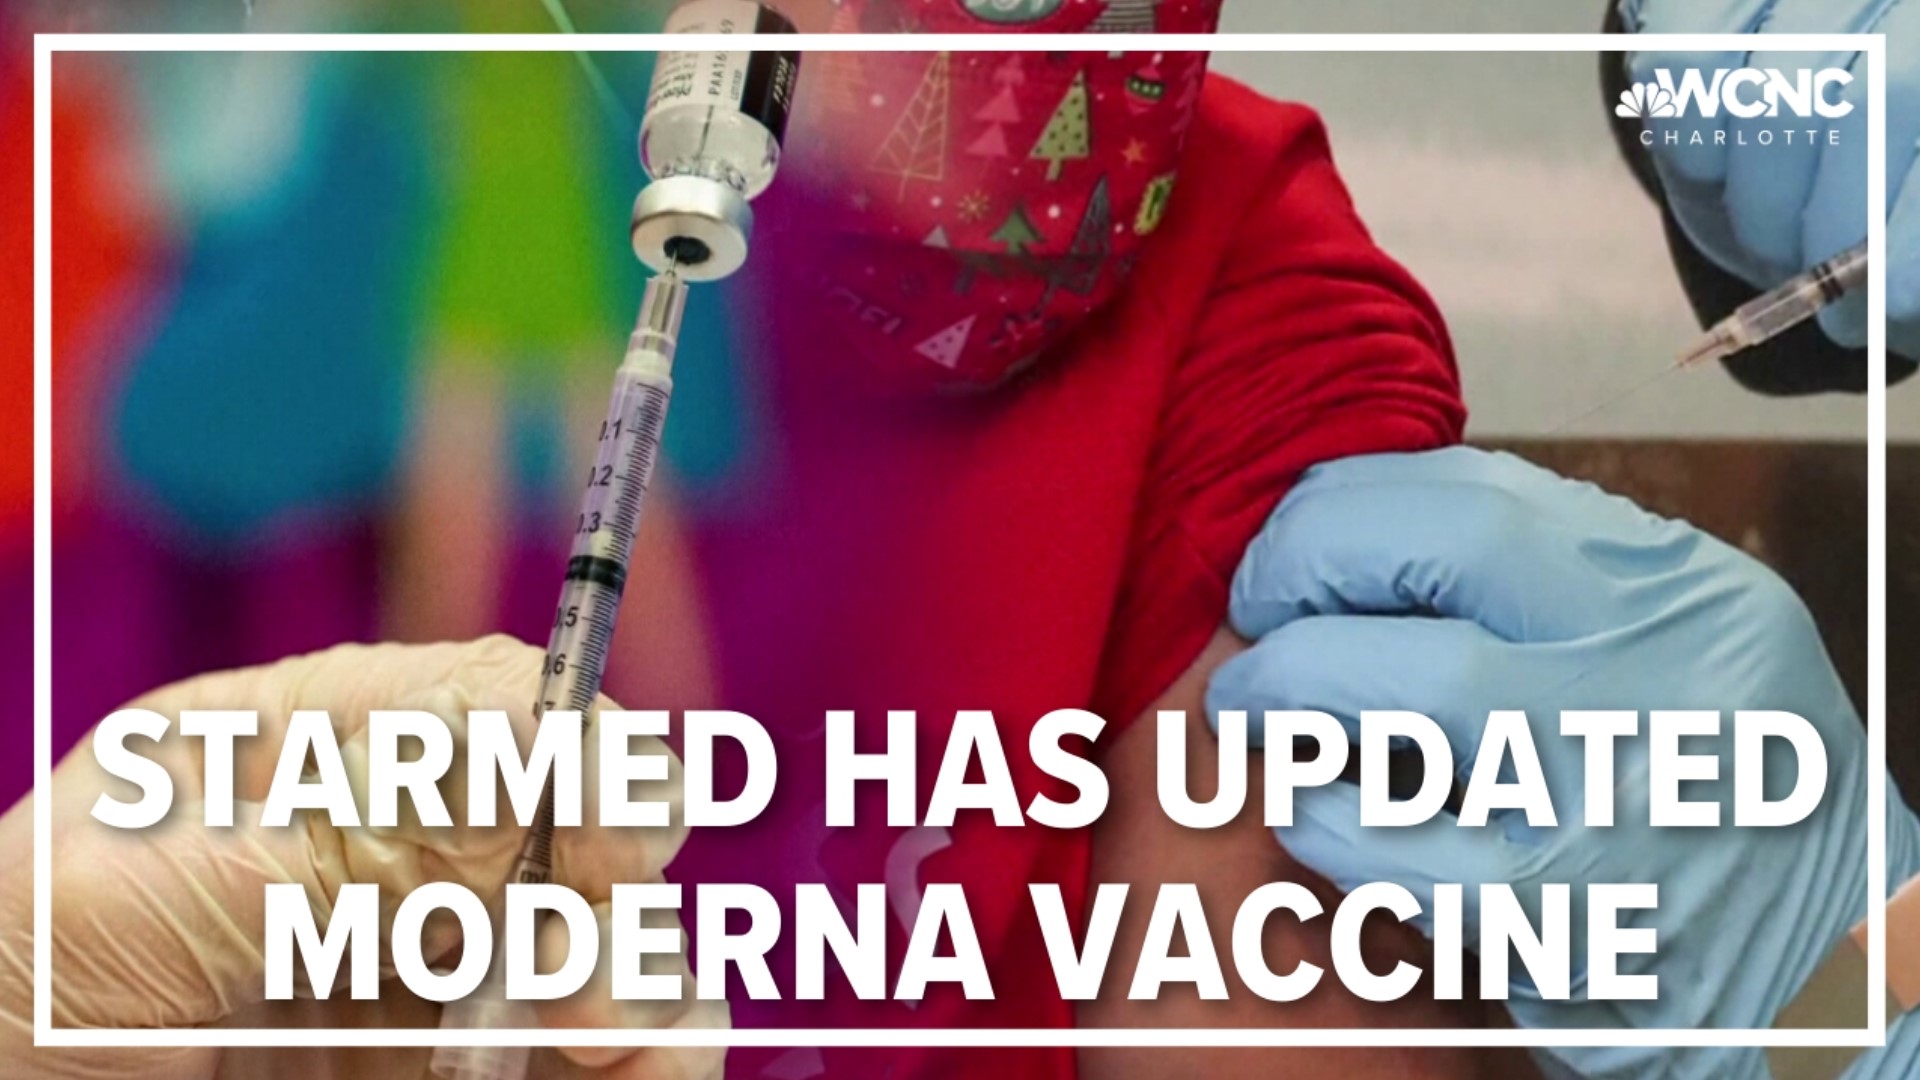 U.S. regulators on Thursday cleared doses of the updated COVID-19 vaccines for children younger than age 5.